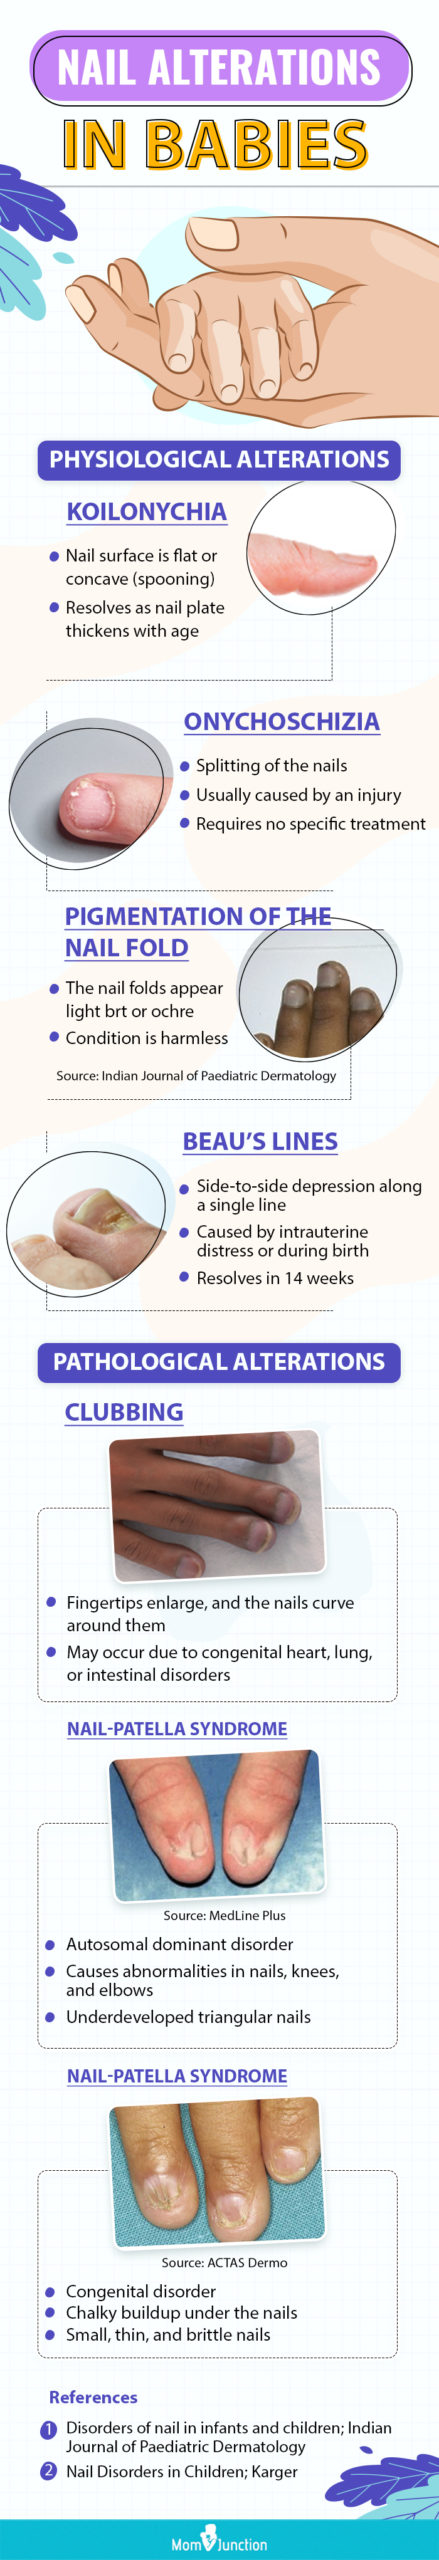 nail-alterations in babies (infographic)